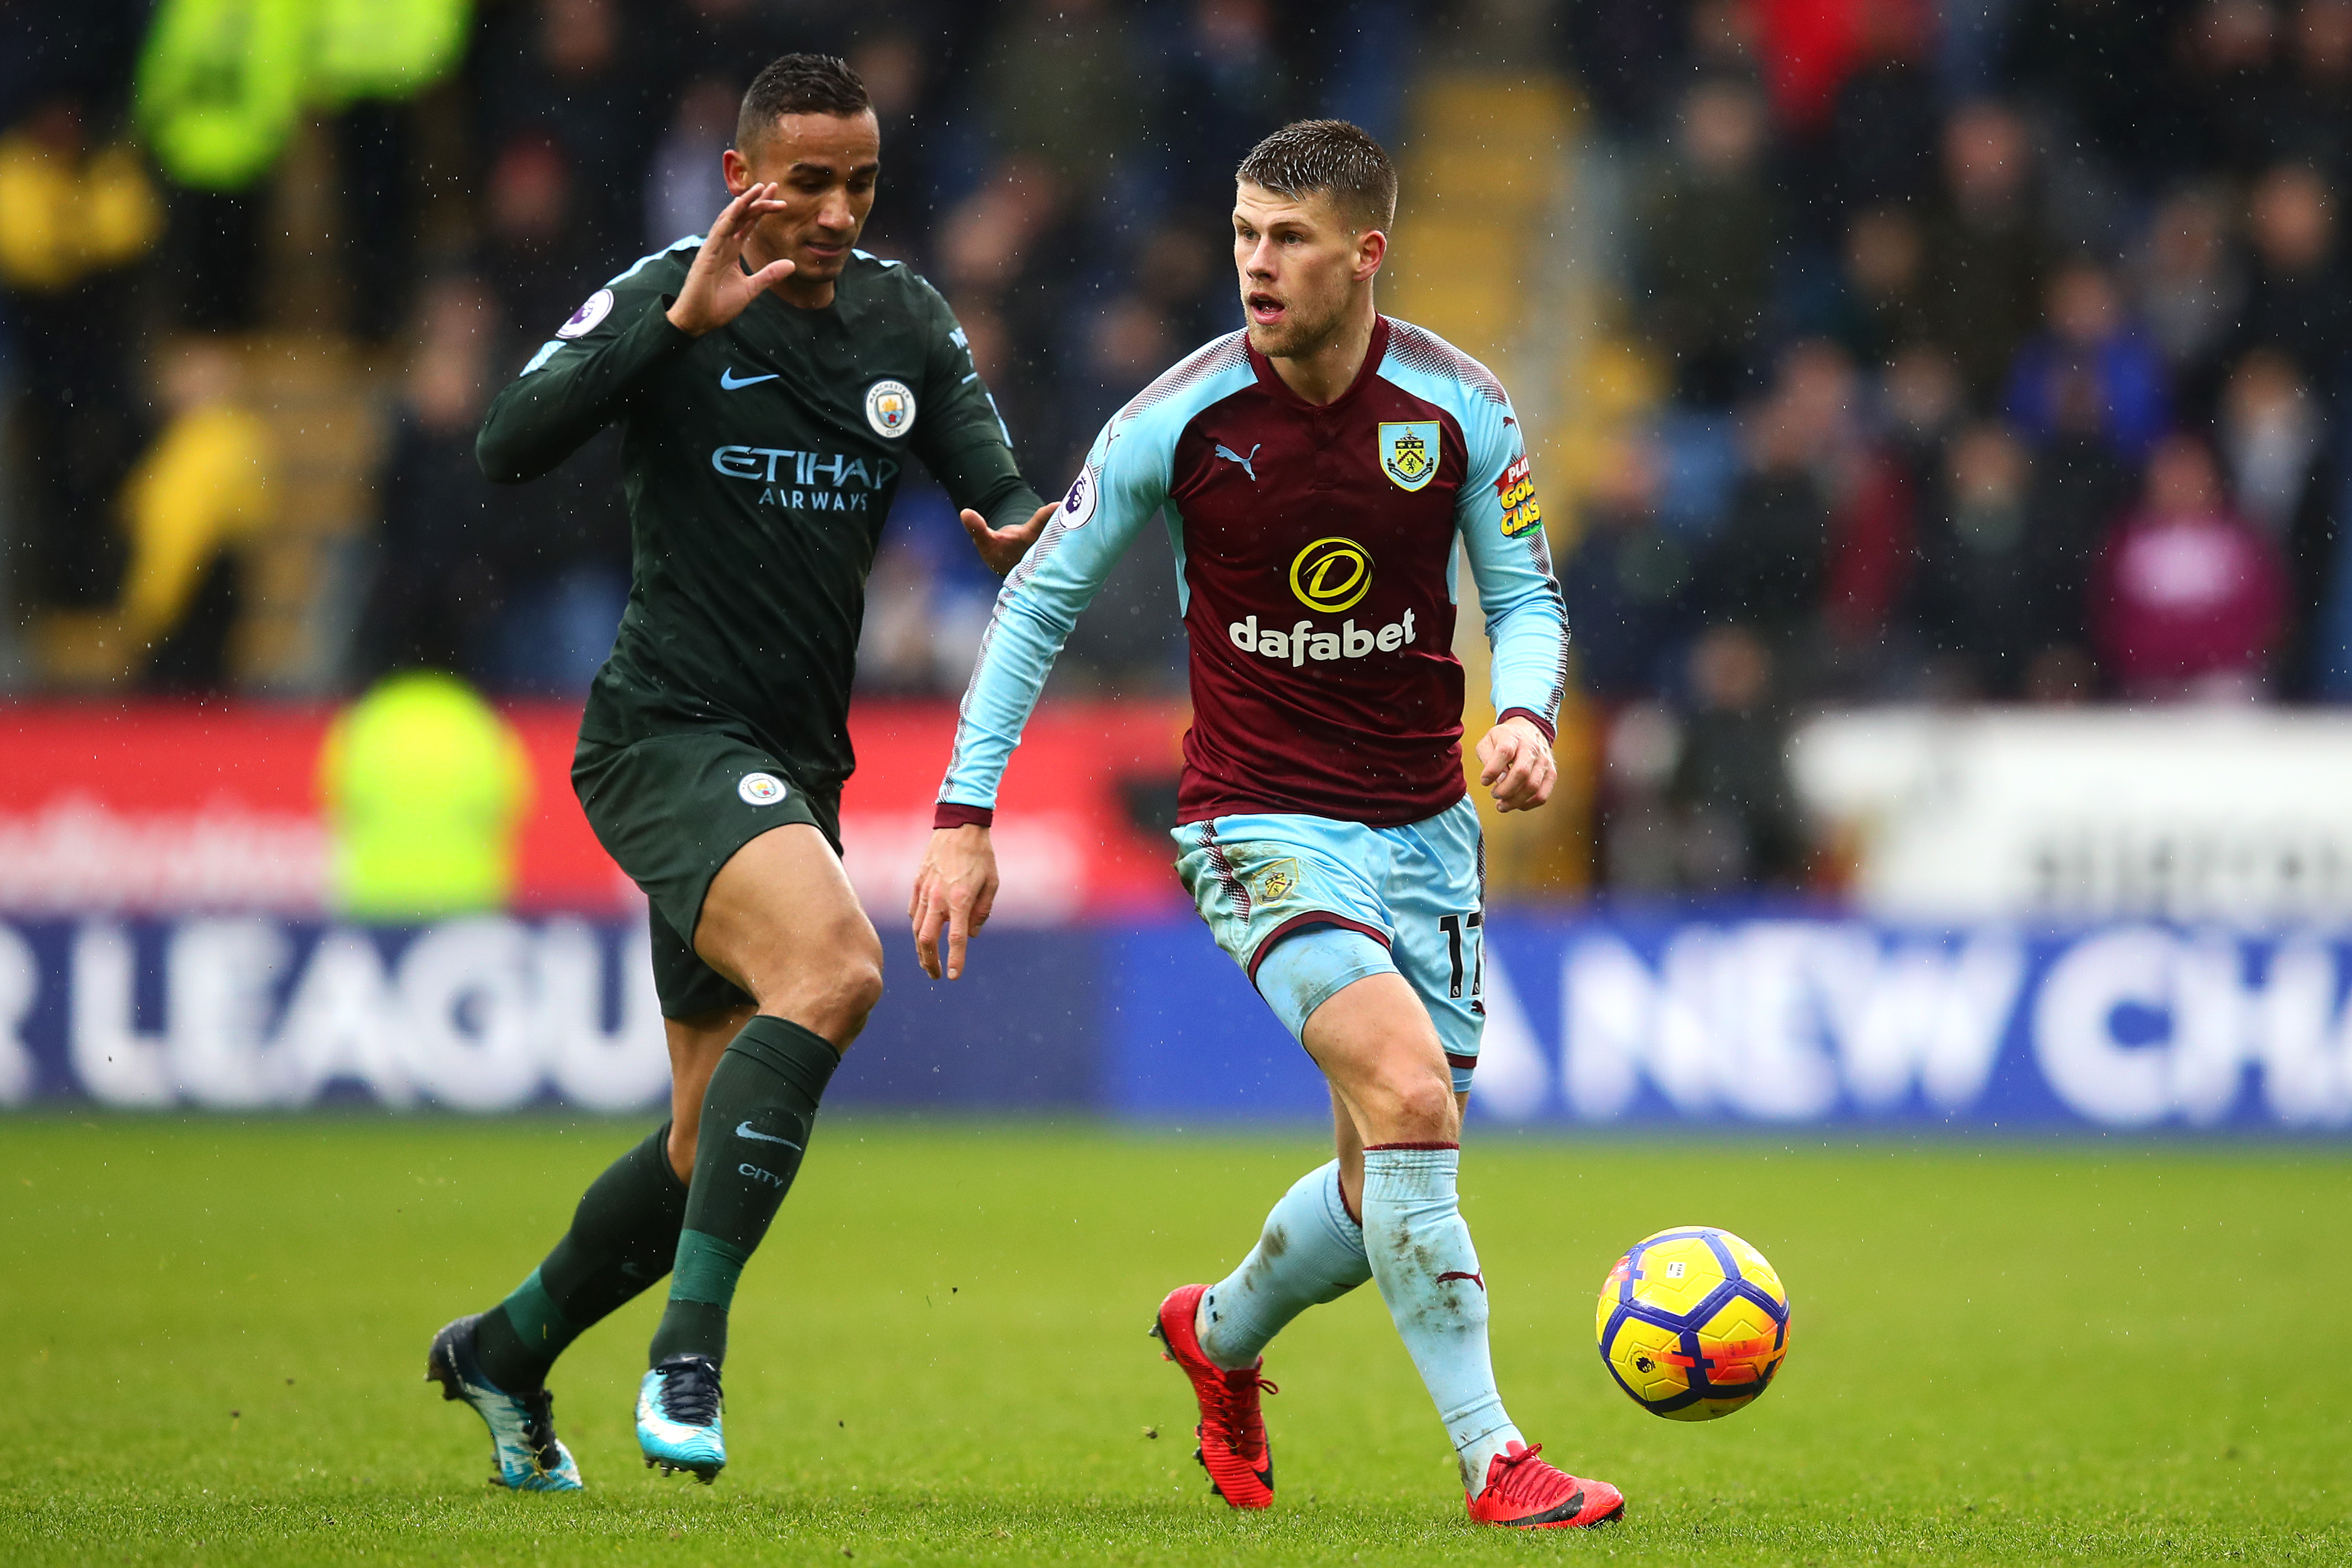 Premier League | Burnley shares spoils with Manchester City; United beat Huddersfield 2-0